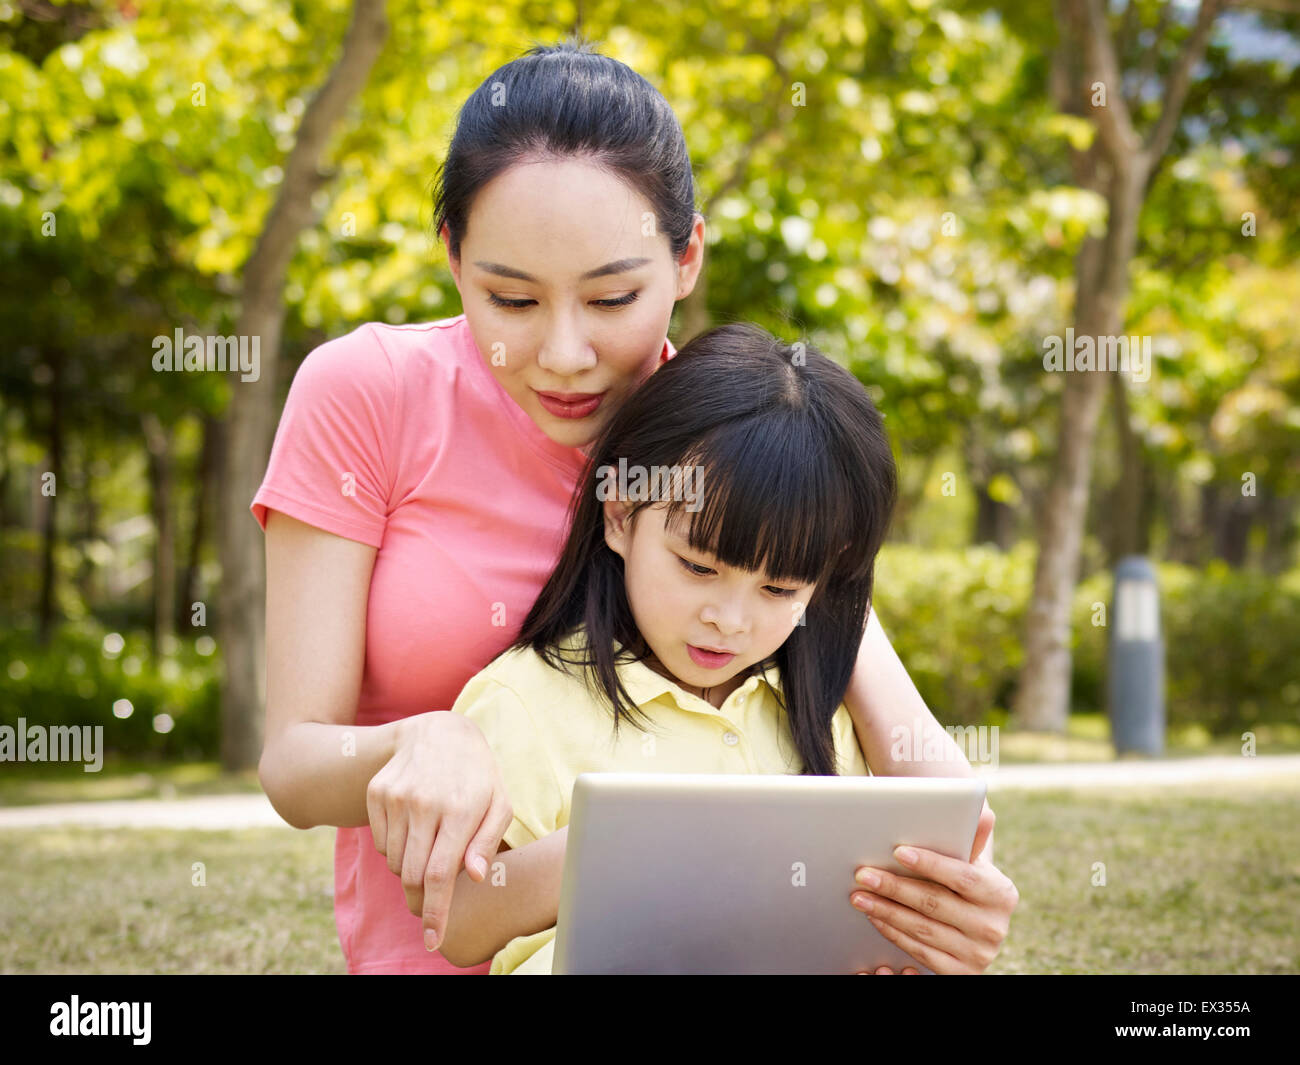 asian mother and daughter using ipad outdoors Stock Photo